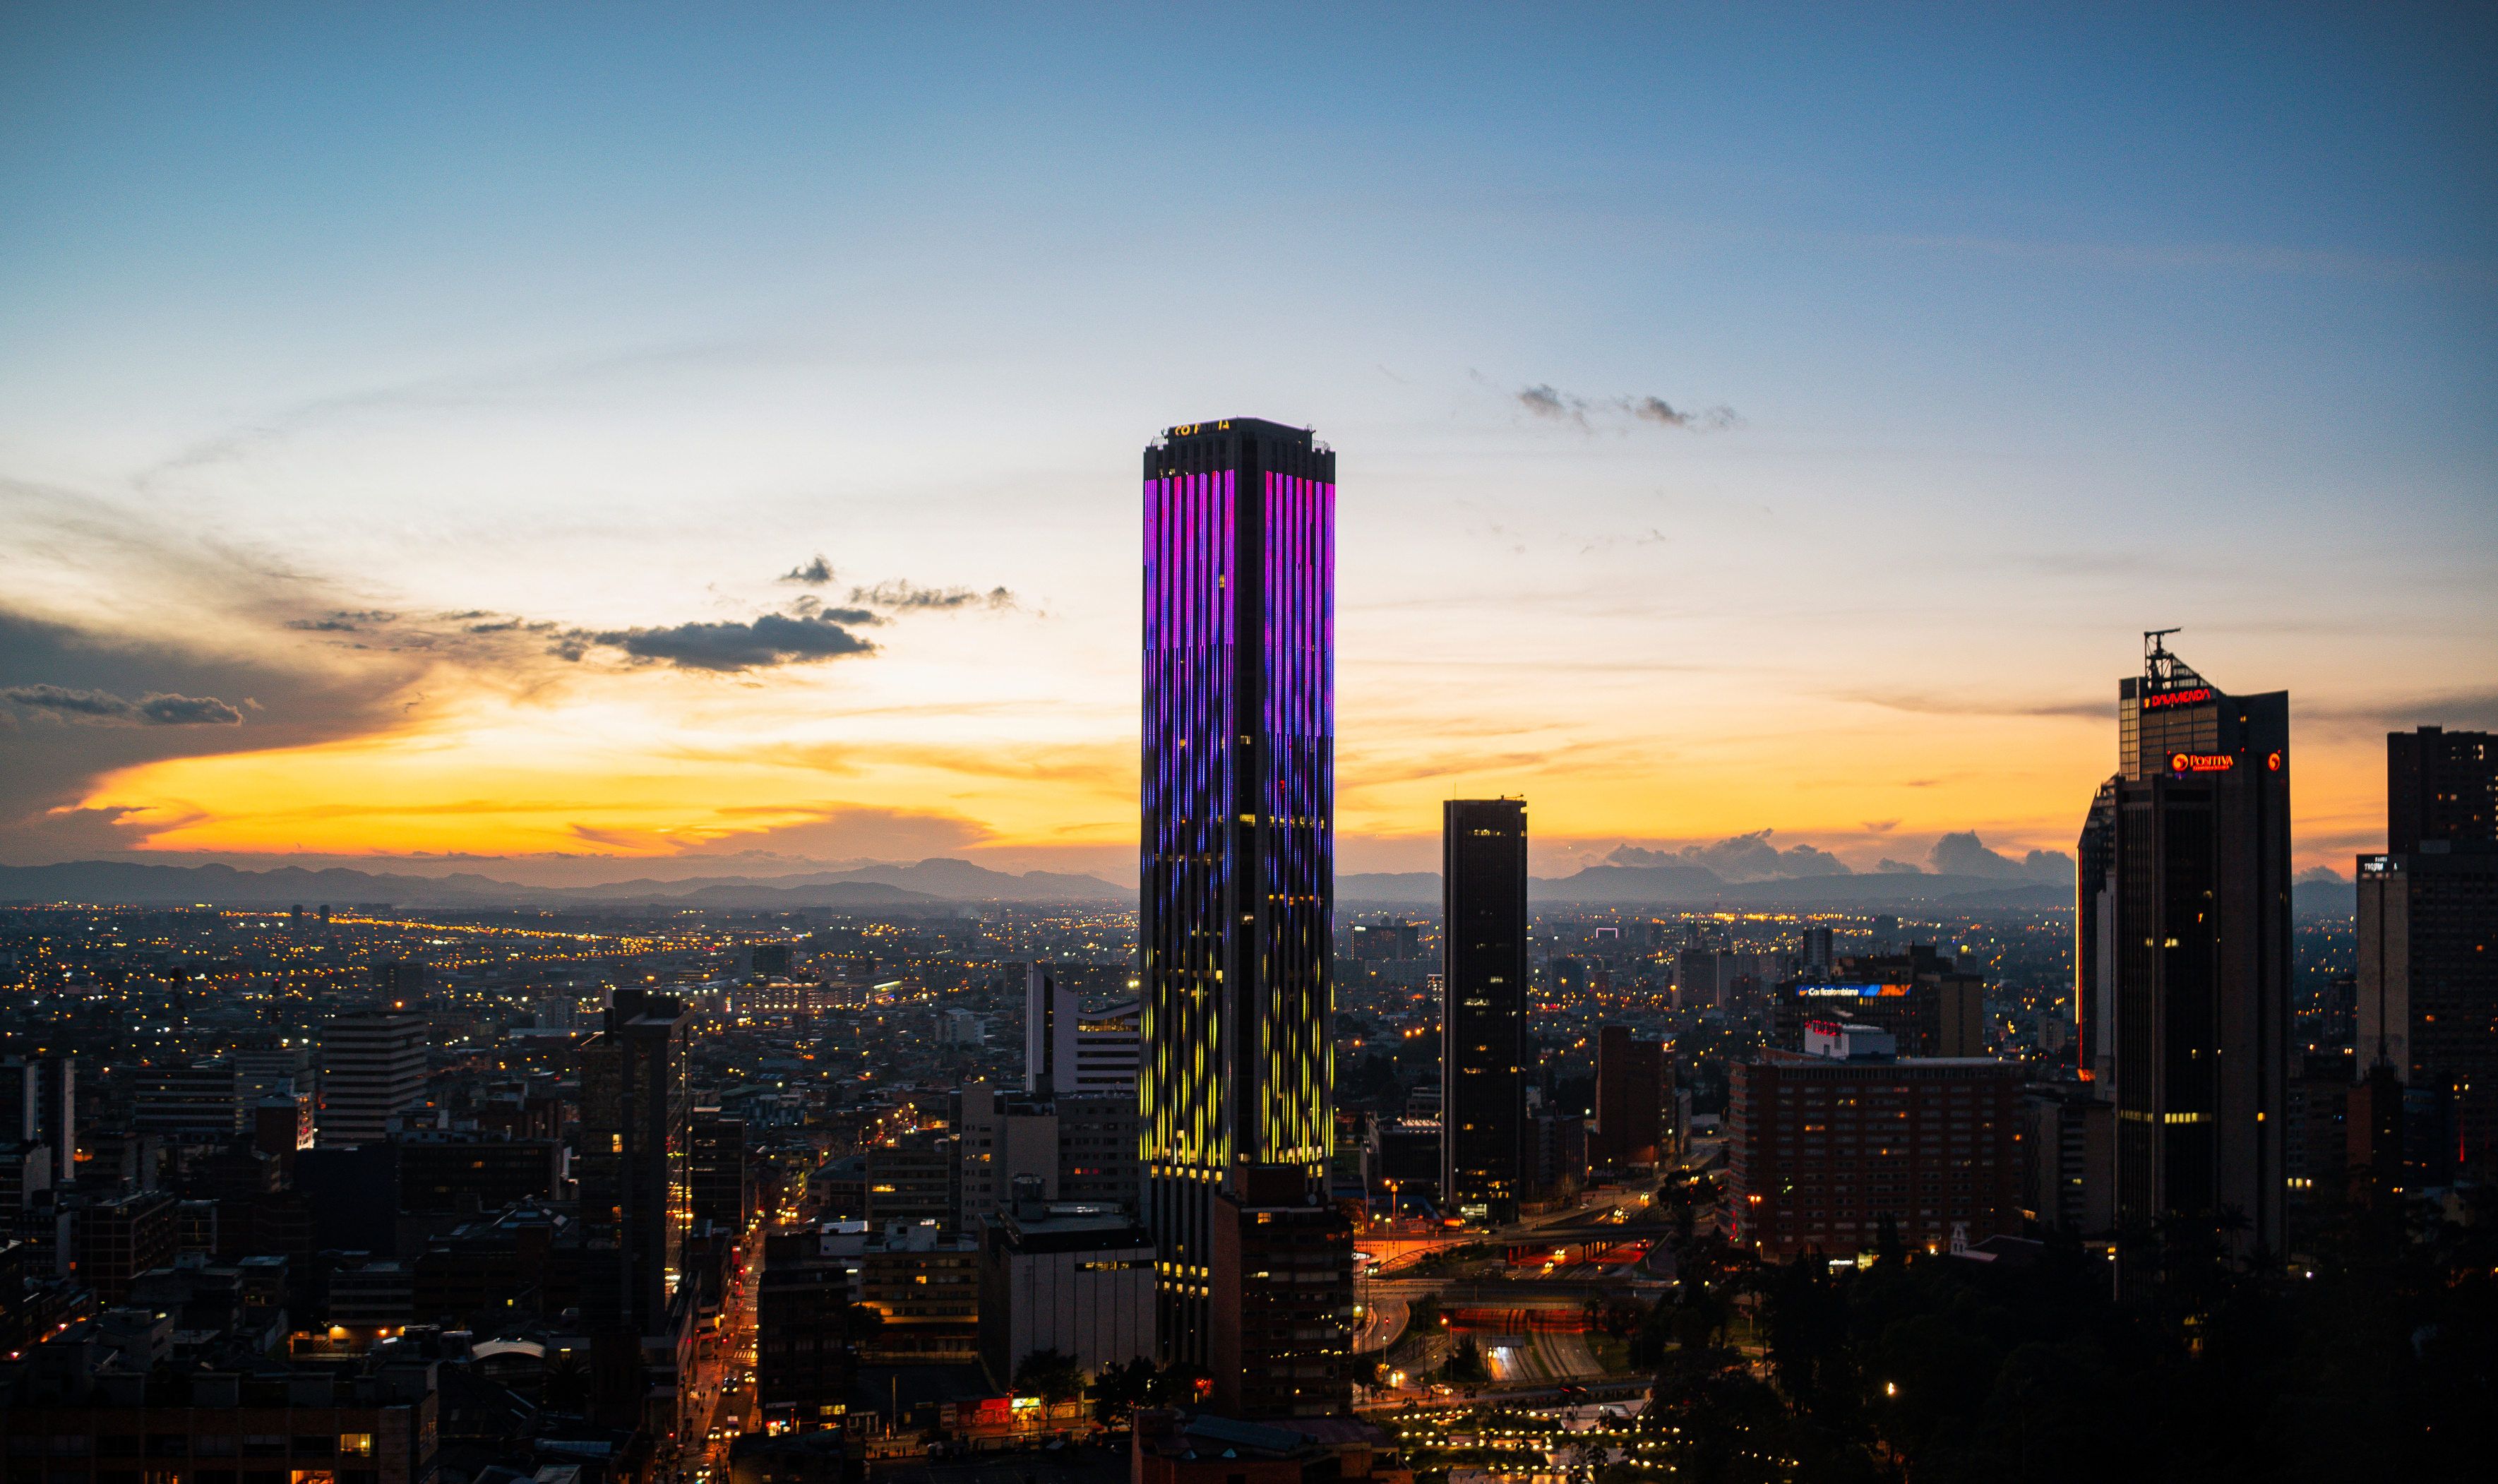 An Aerial Shot of Colpatria Tower During Sunset